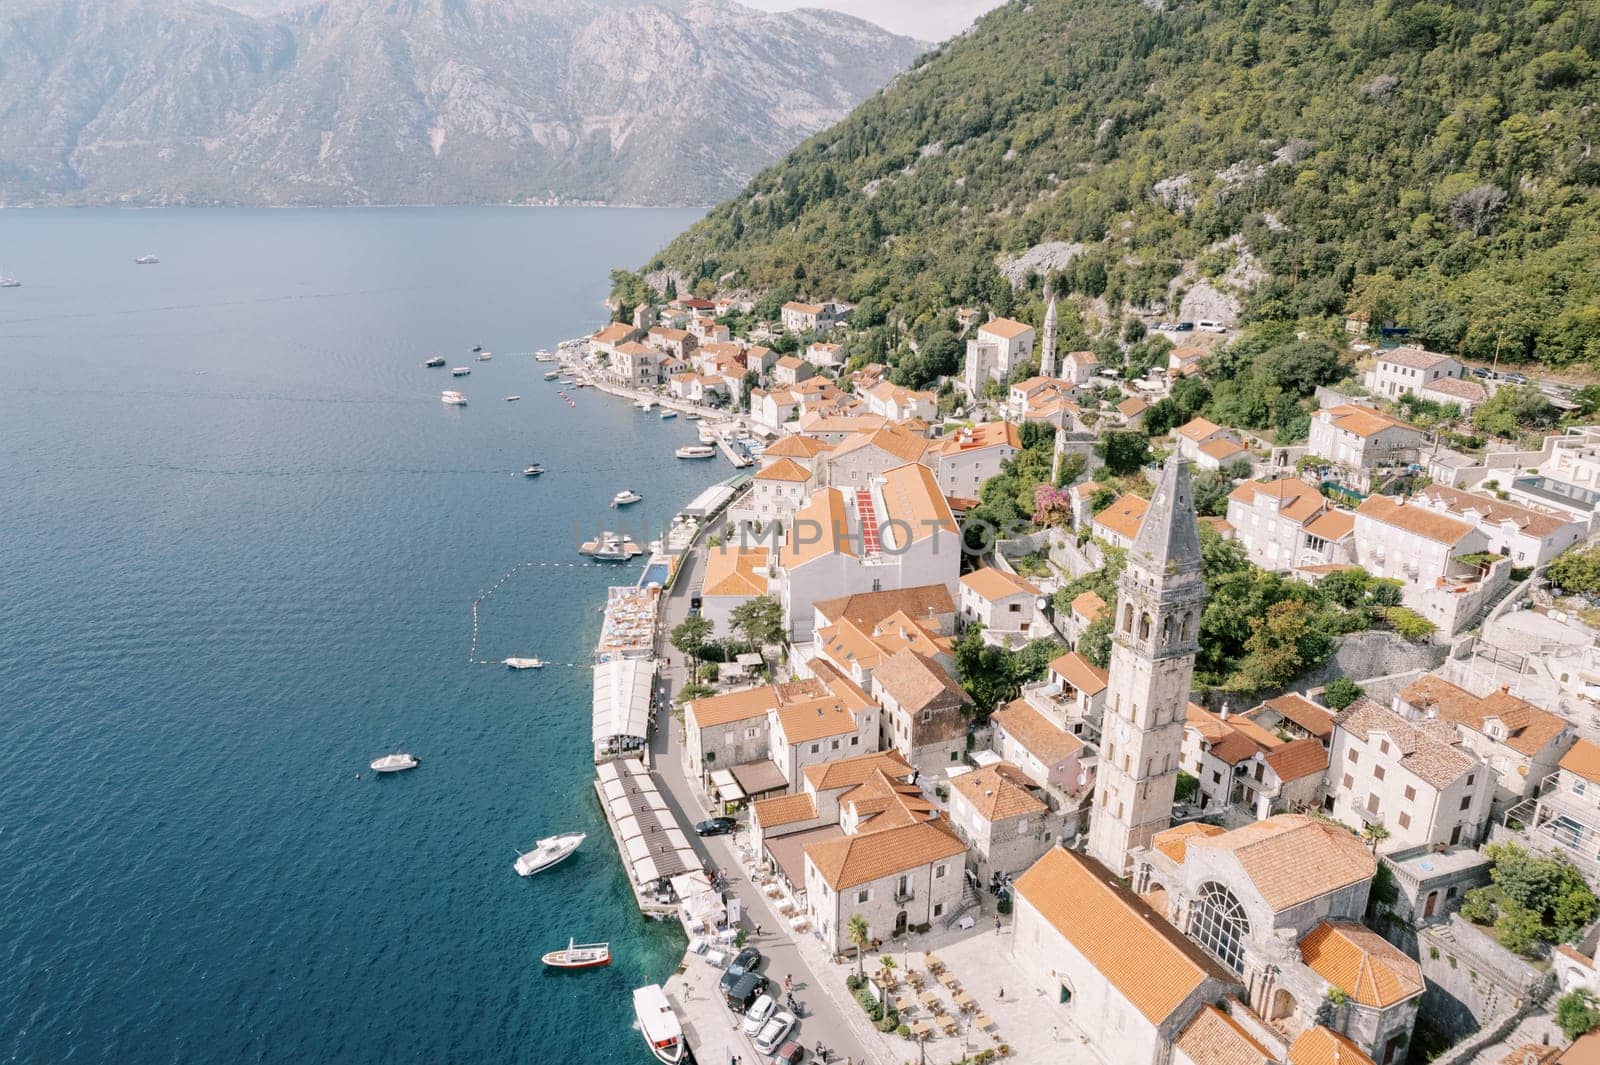 Moored boats off the coast of Perast with the high bell tower of the Church of St. Nicholas among ancient houses. Montenegro. Drone by Nadtochiy